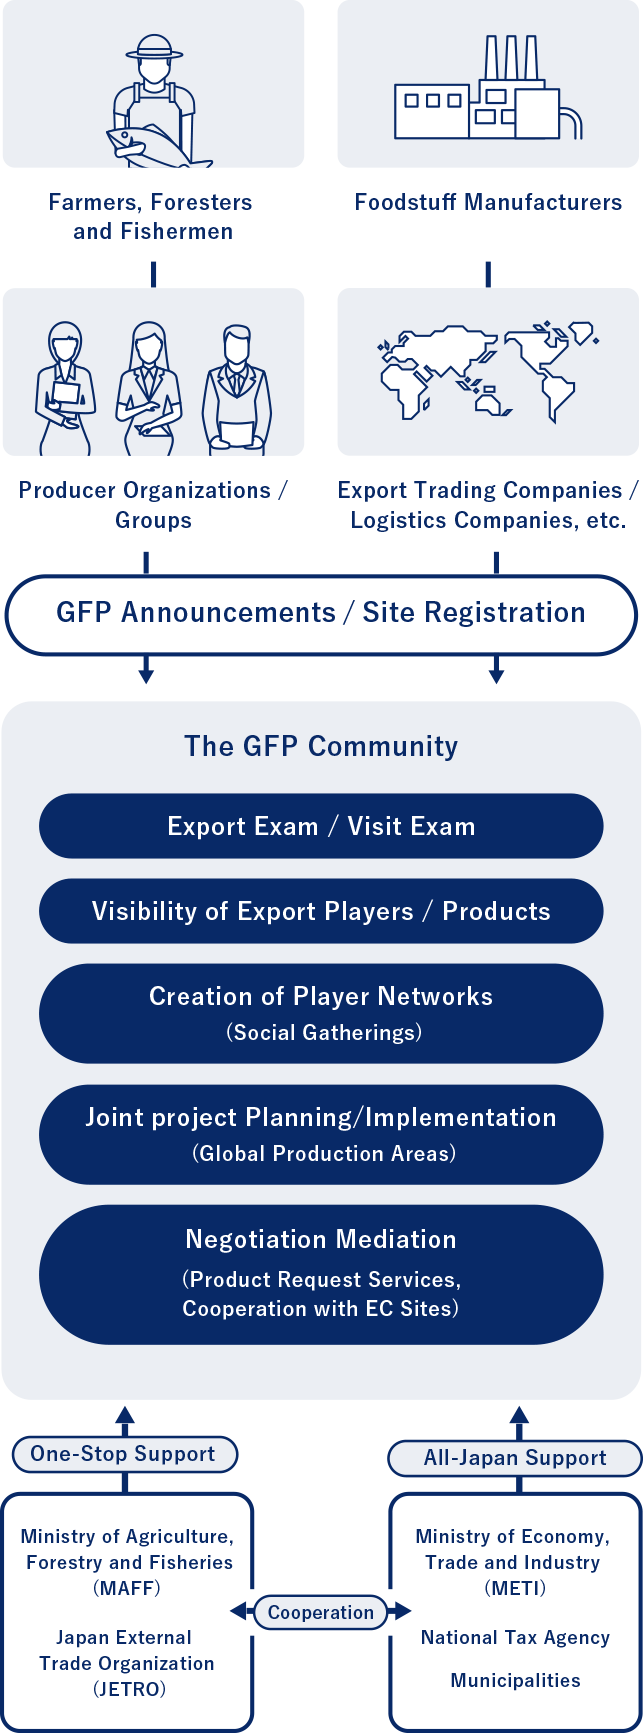 The GFP Community